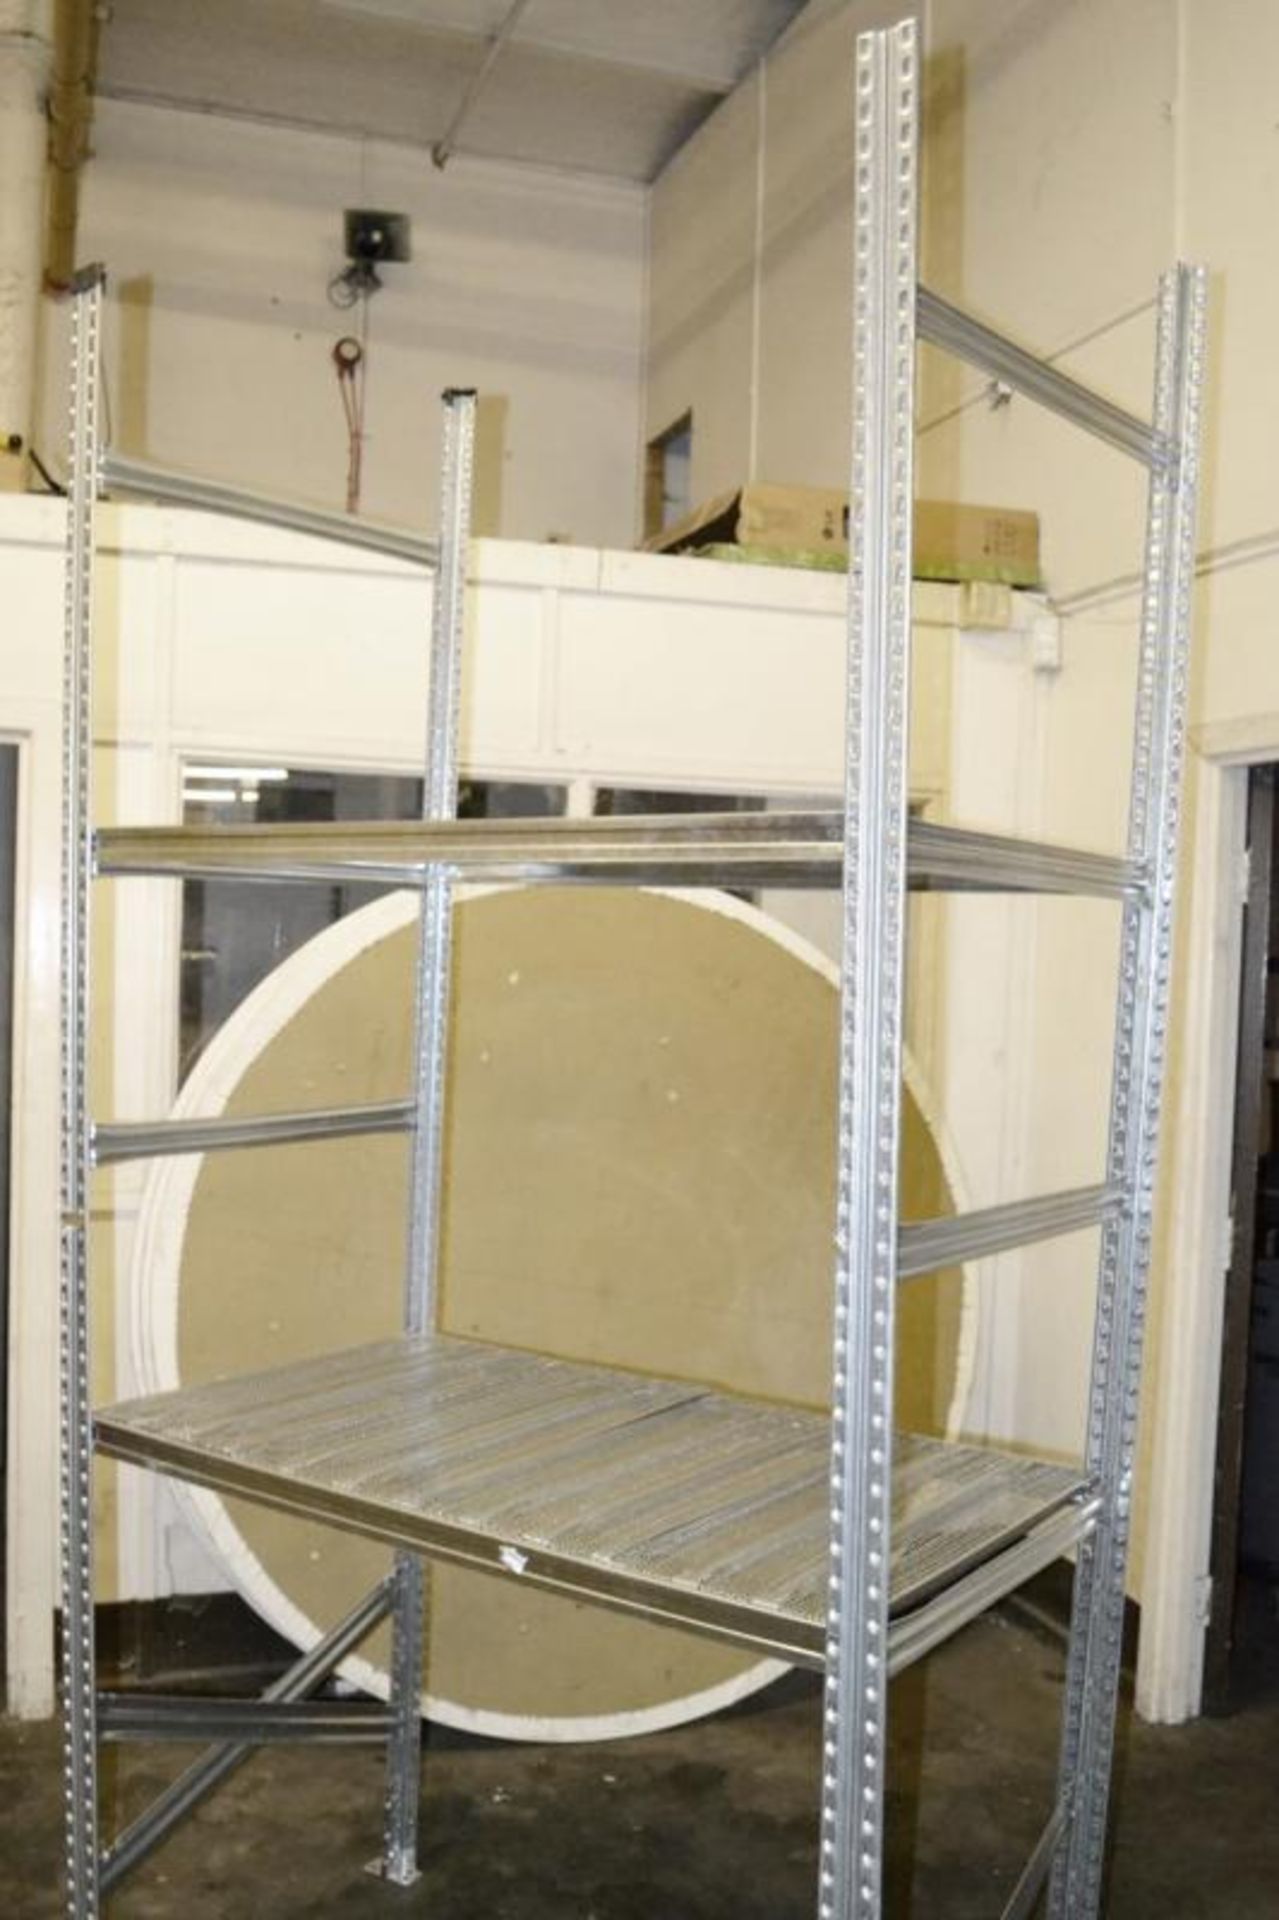 4 x Bays of Metalsistem Steel Modular Storage Shelving - Includes 29 Pieces - Recently Removed - Image 7 of 17